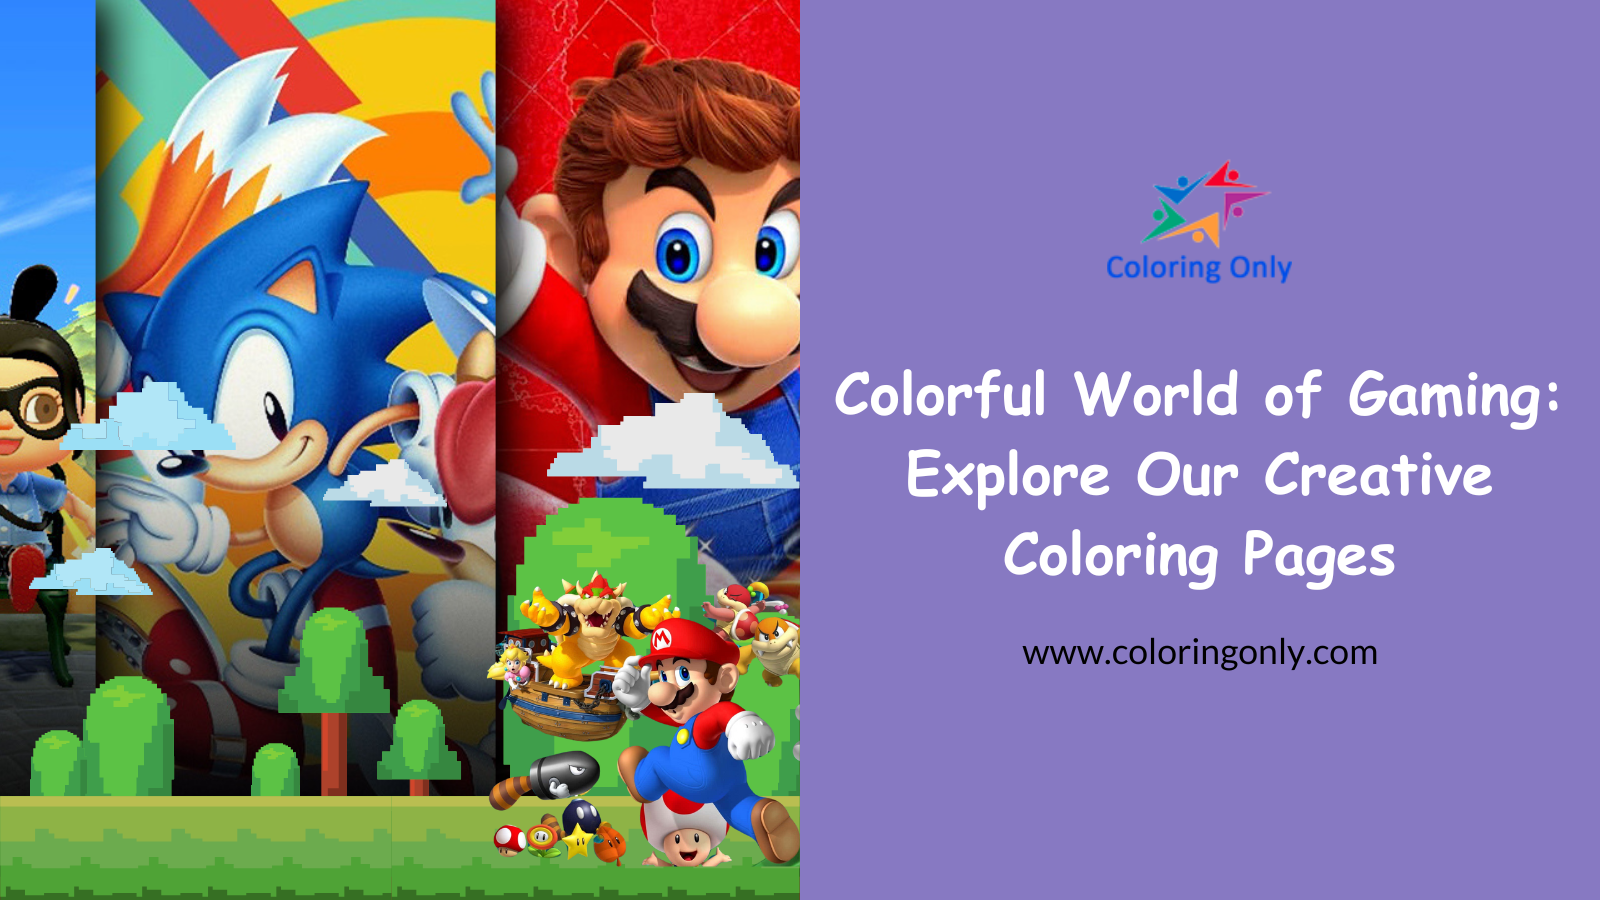 Colorful World of Gaming: Explore Our Creative Coloring Pages